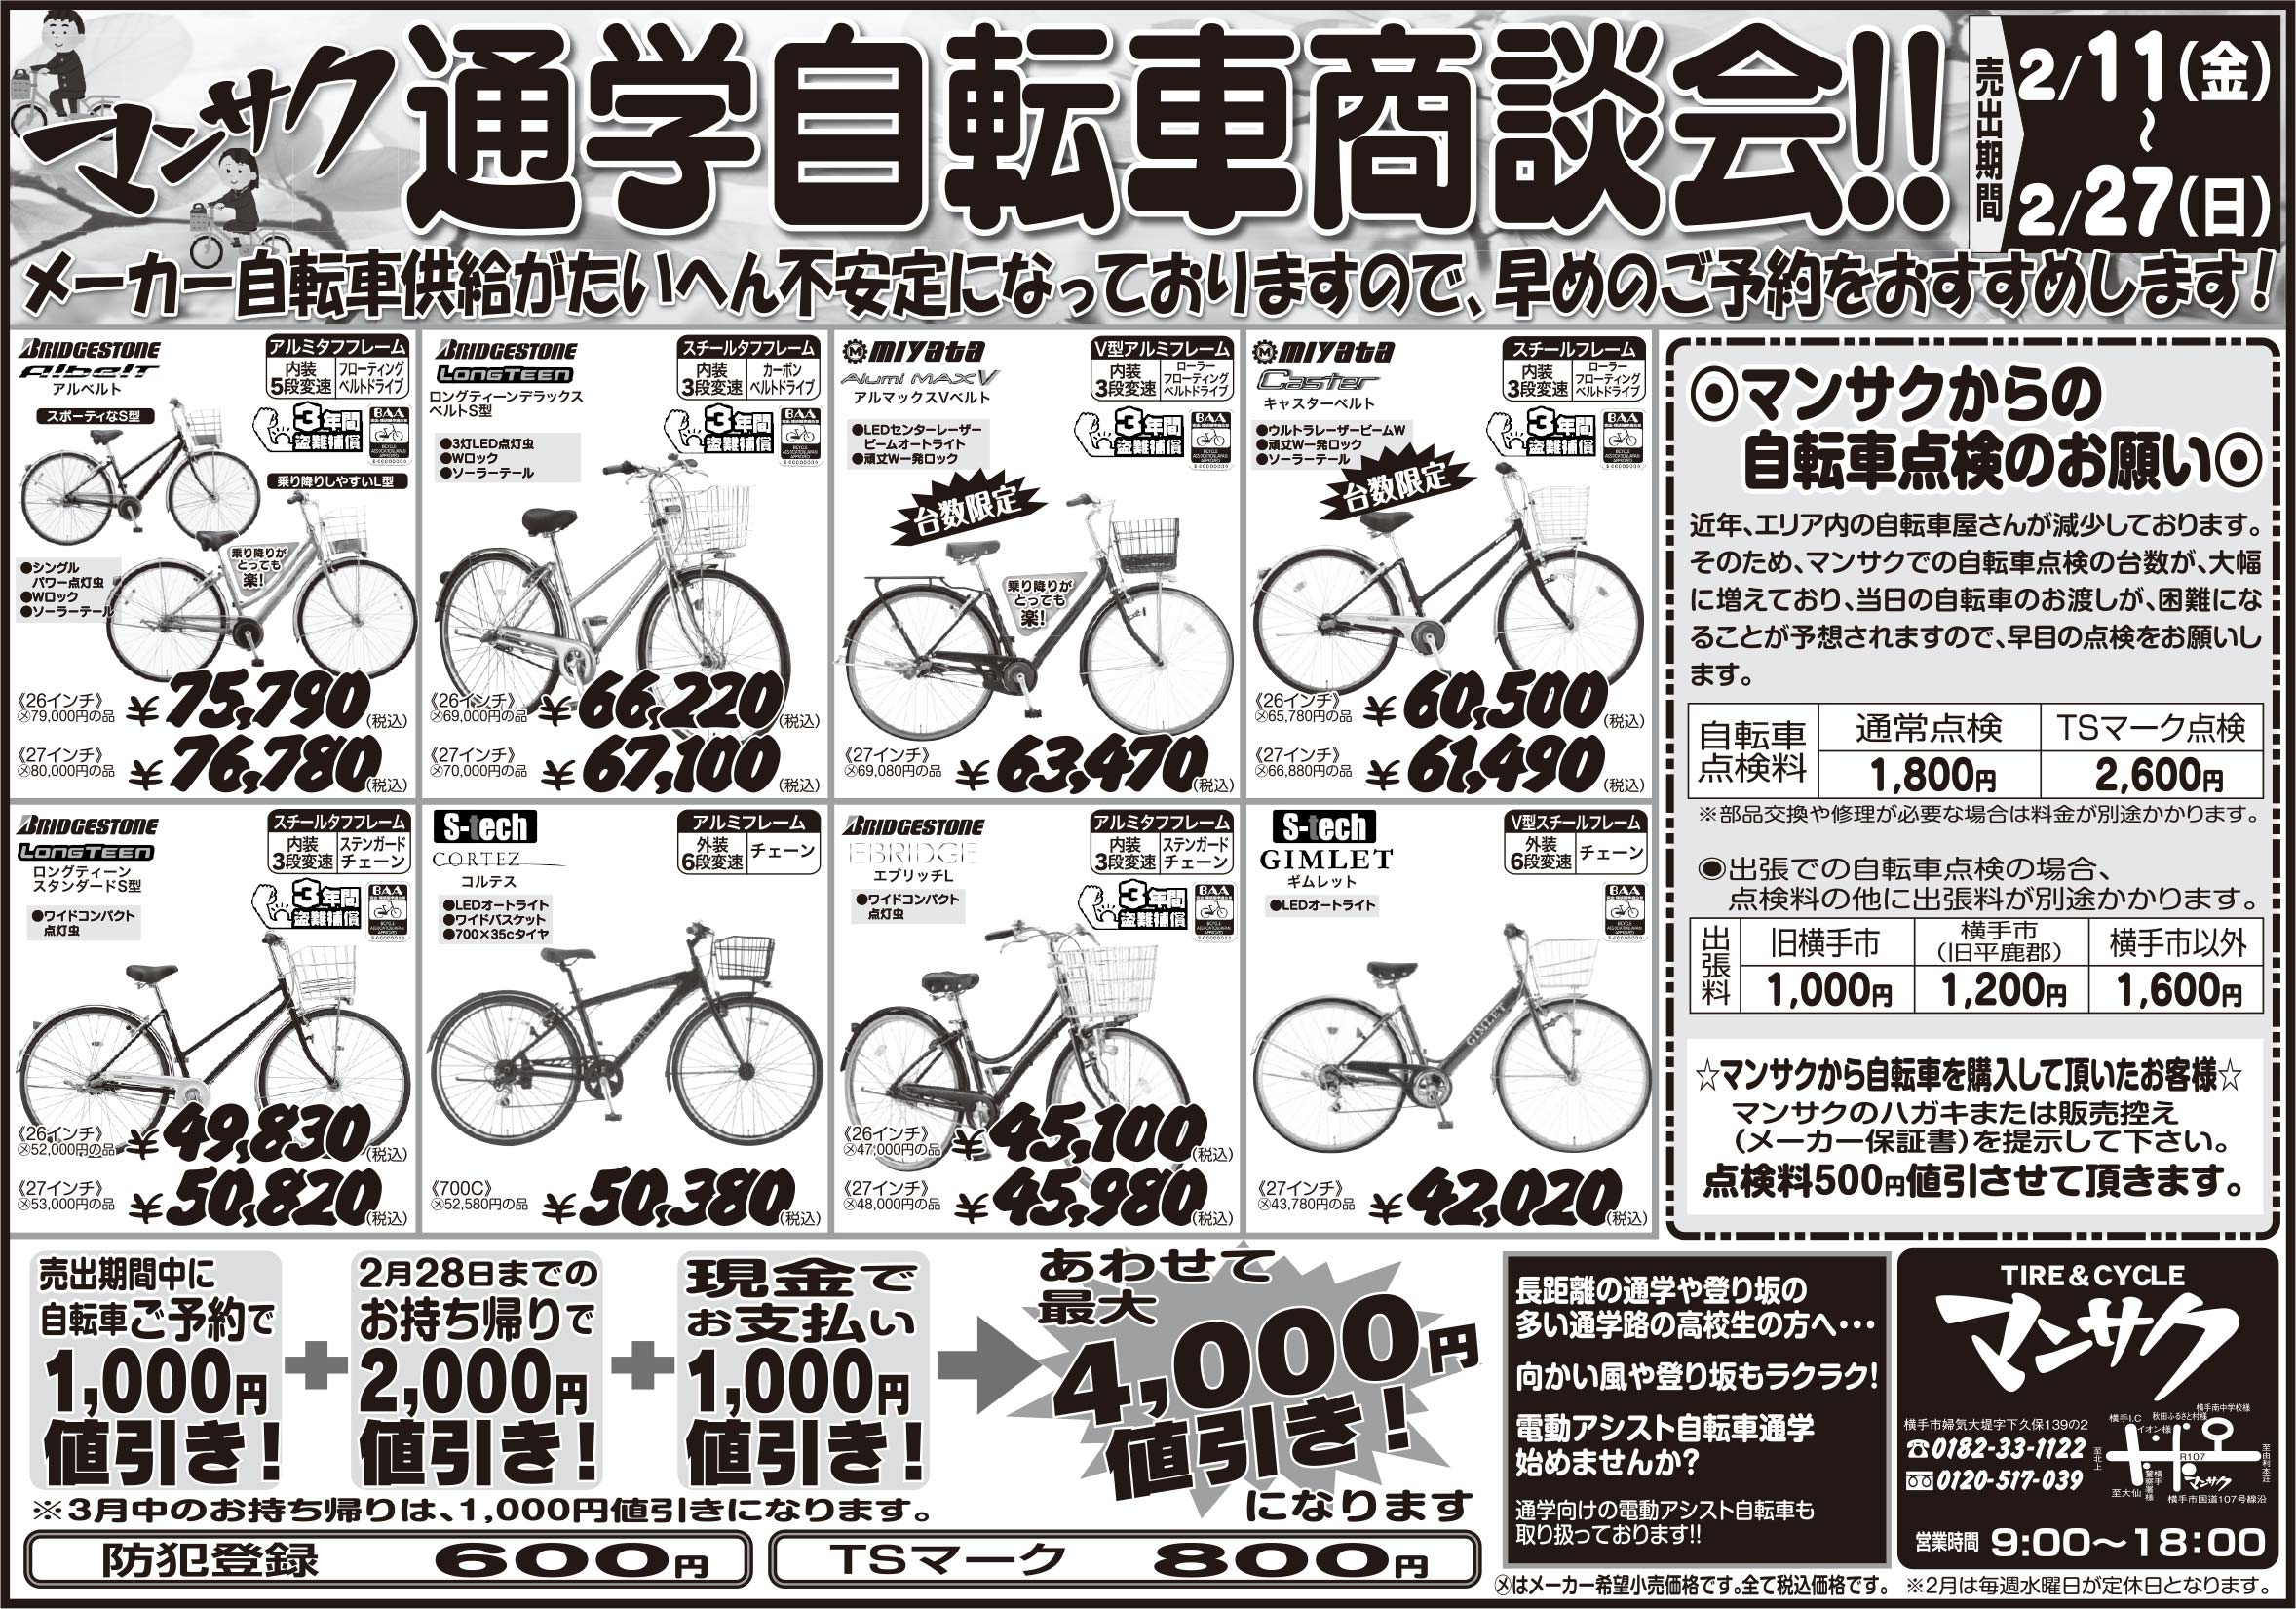 TIRE&CYCLE マンサク様の2022.02.11広告